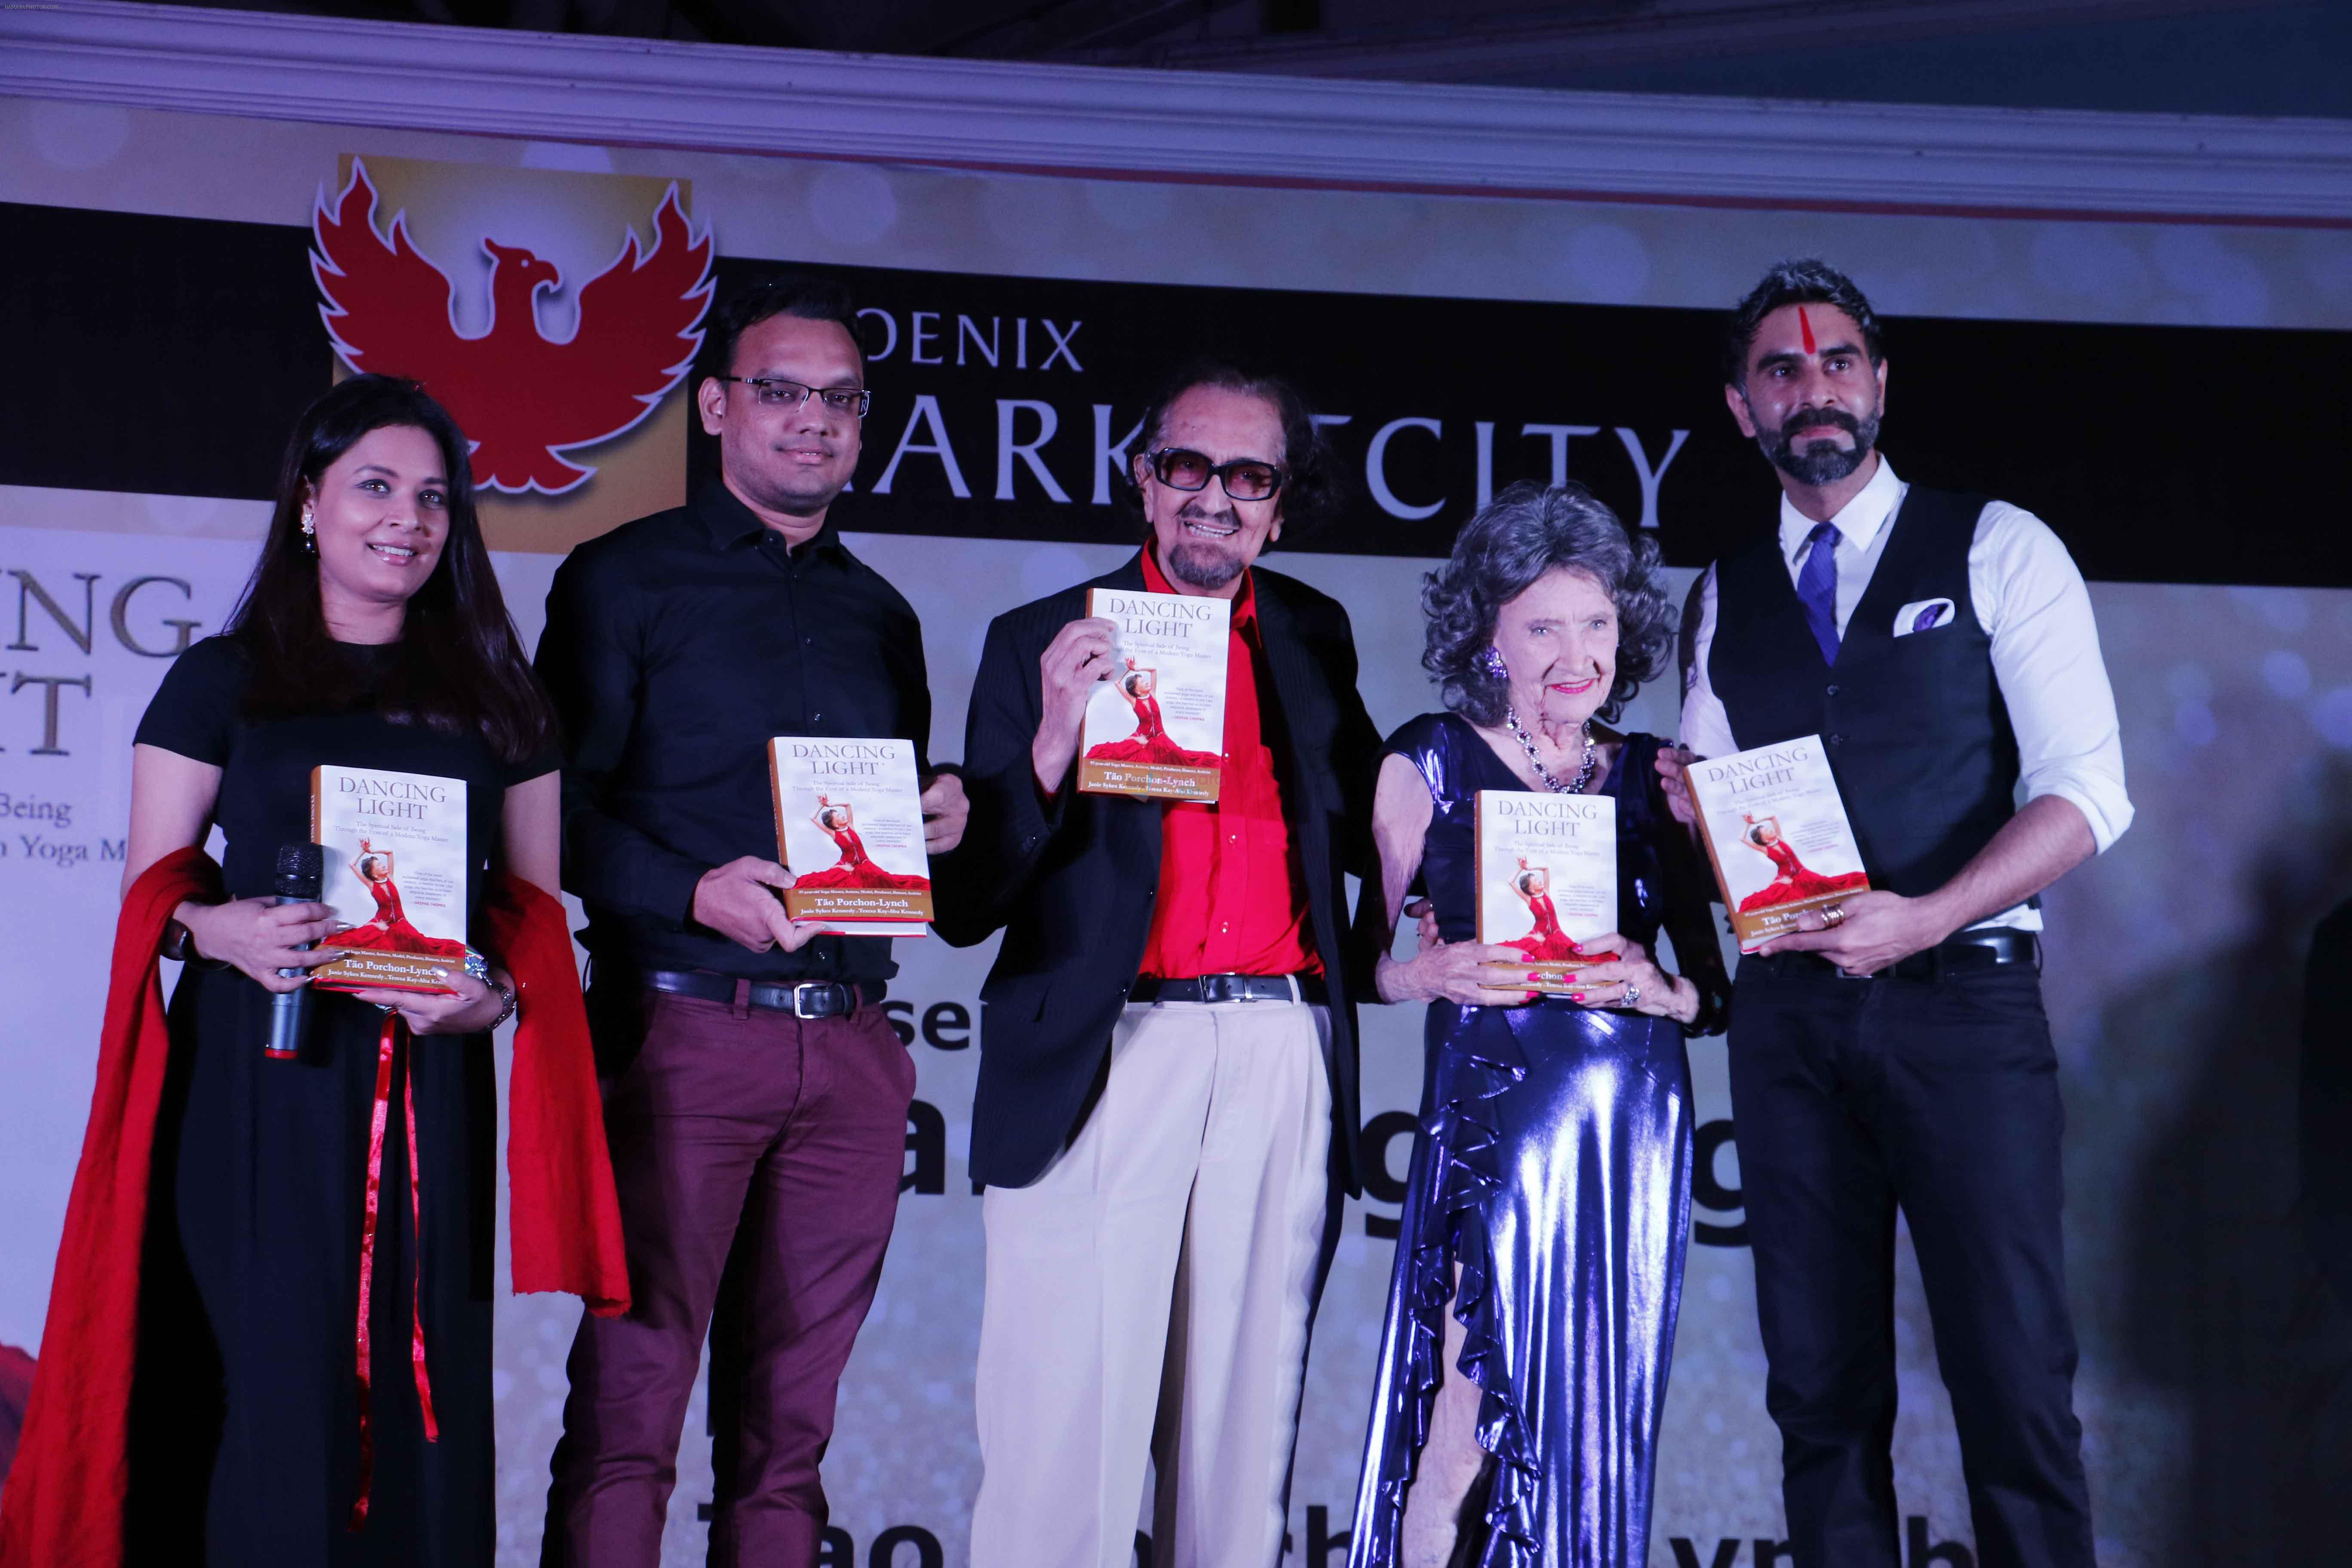 Alyque Padamsee, Sandip Soparrkar, Sarbani Mukharjee and Tao Porchon Lychn at the launch of Dancing Light autobiography of Ms Tao Porchon-Lynch on 26th Dec 2015